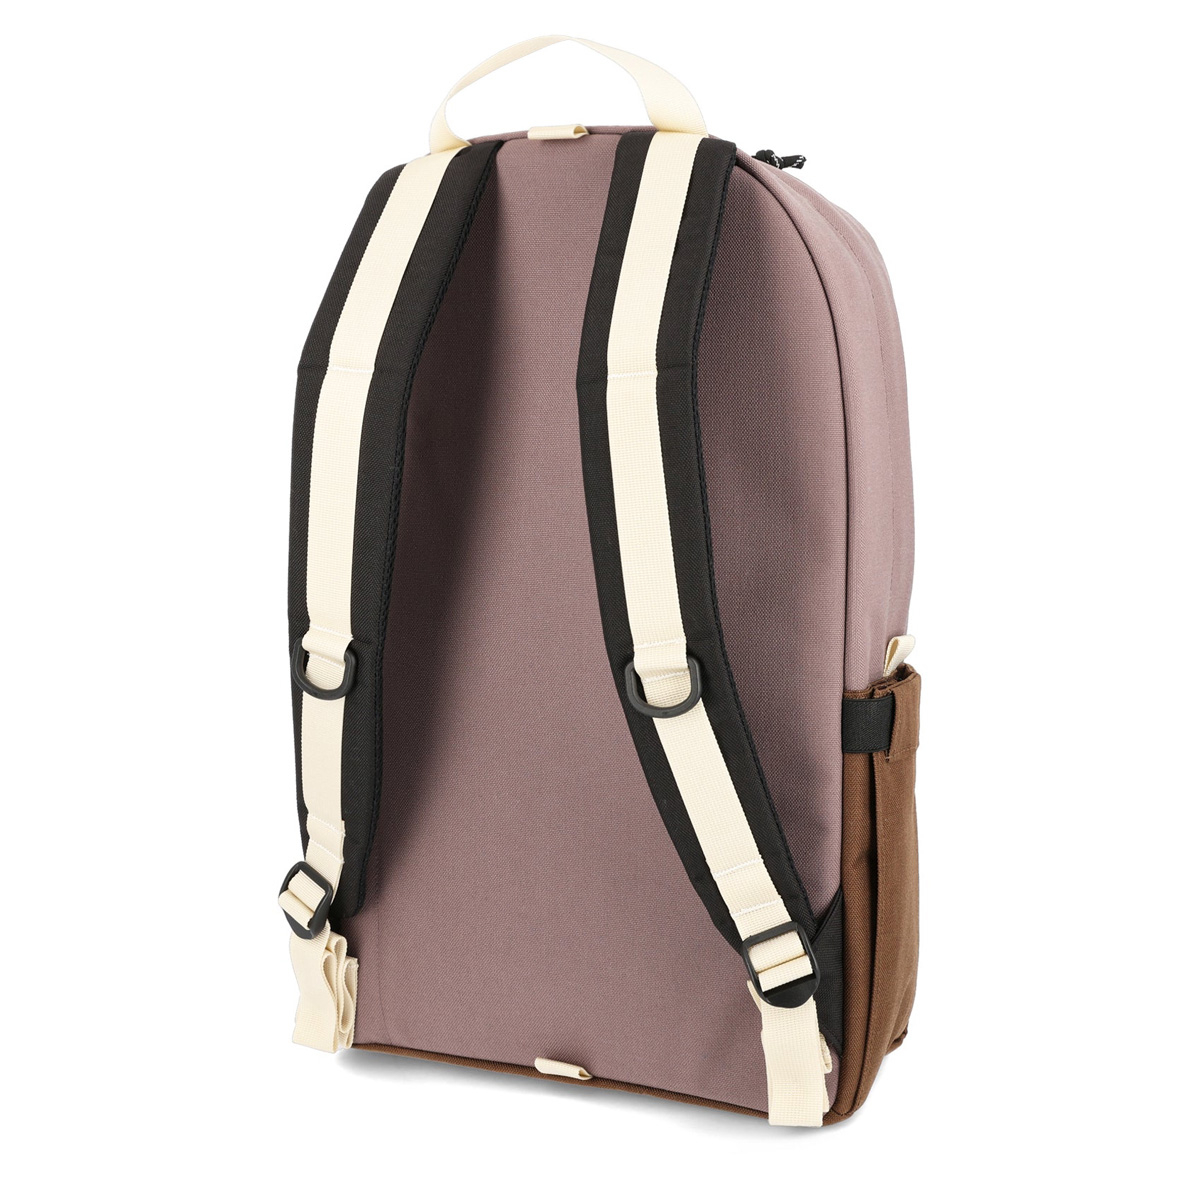 Topo Designs Daypack Classic Peppercorn/Cocoa, stylish and functional pack, ideal travel companion, schoolmate or pack mule